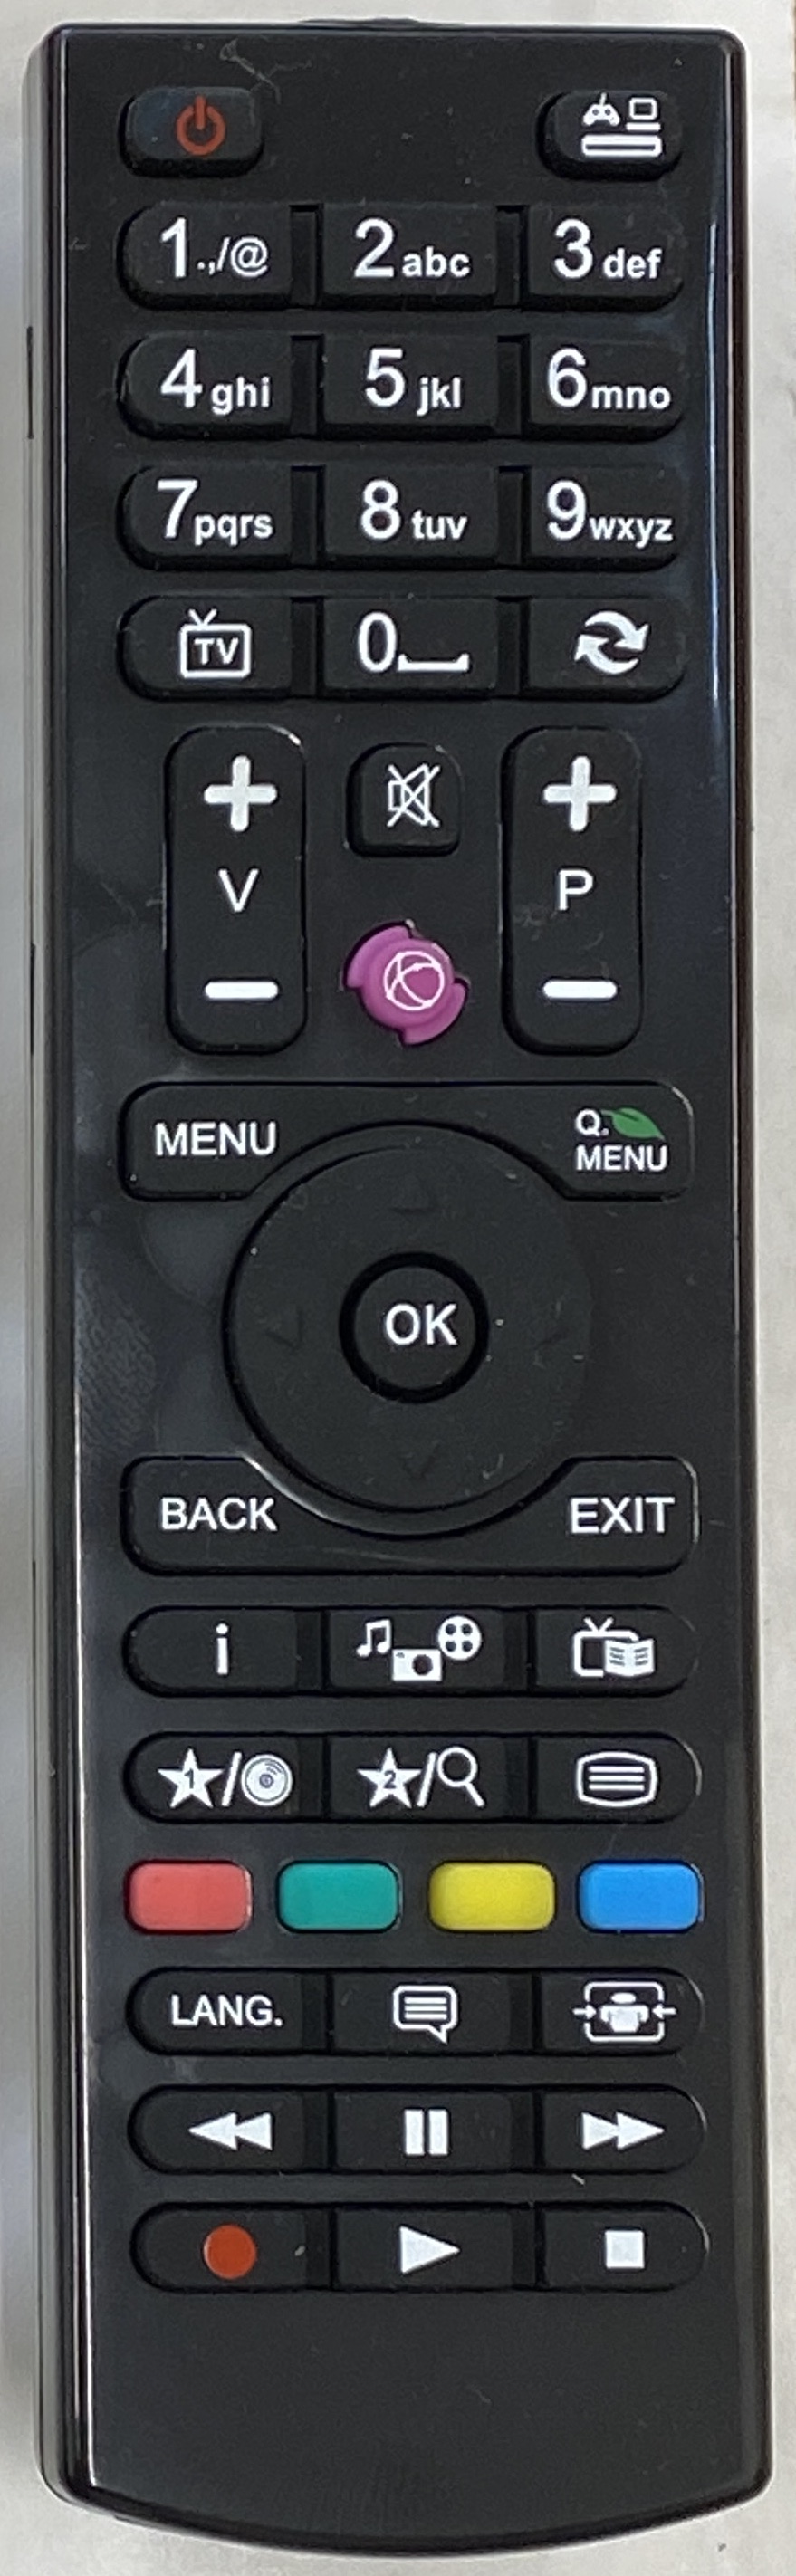 DIGIHOME 42278FHDDLED Remote Control Original